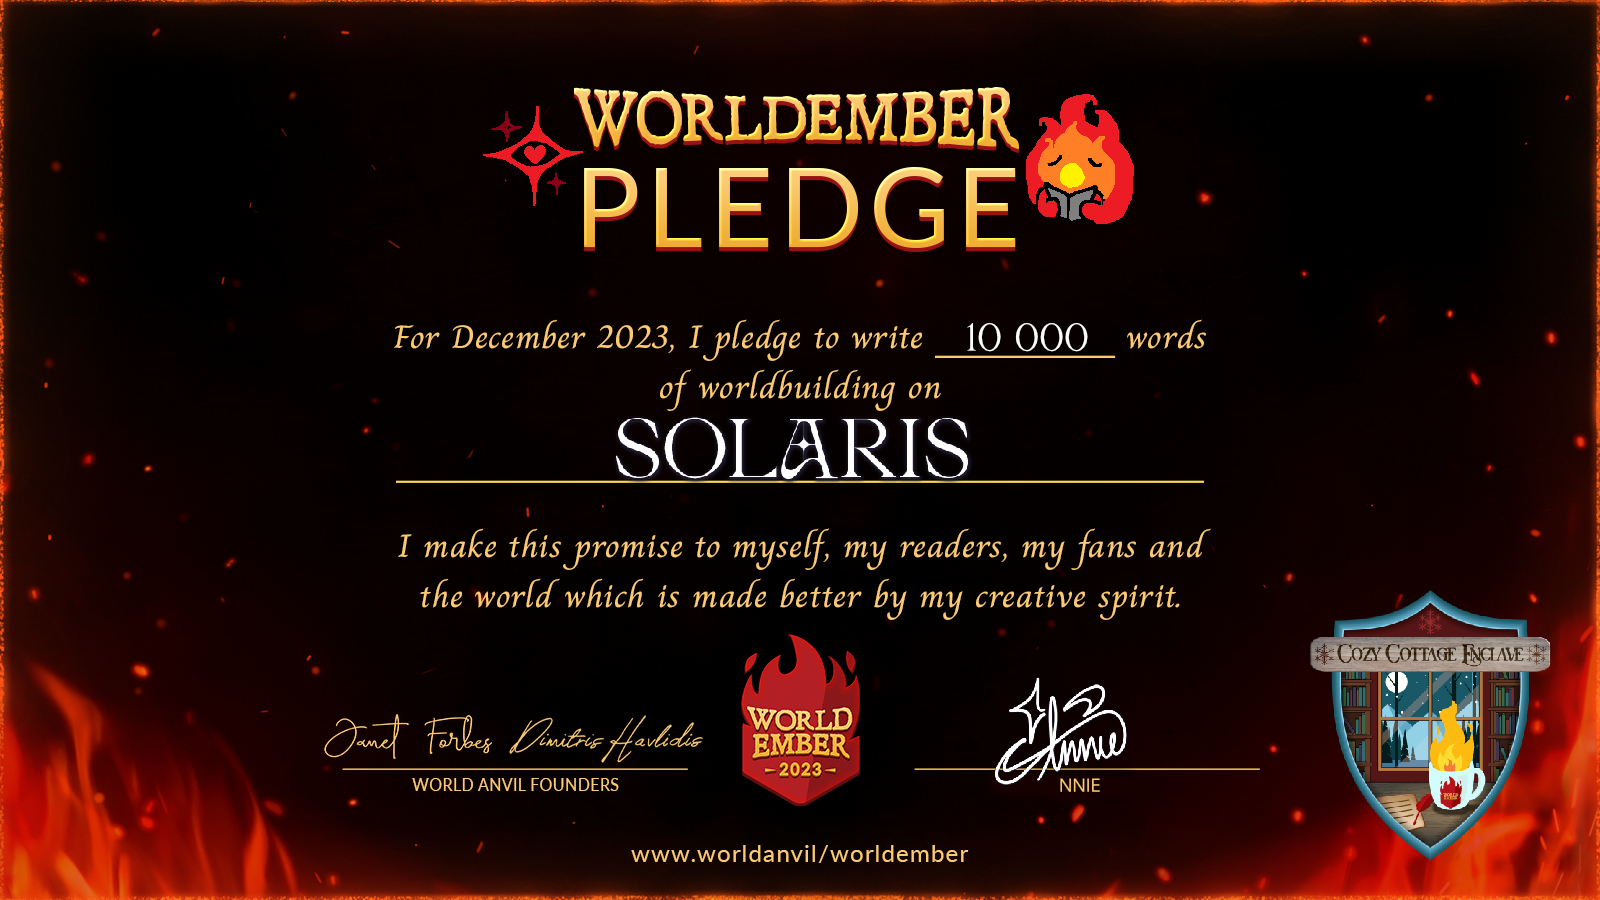 A pledge to write 10 000 words of worldbuilding in Solaris